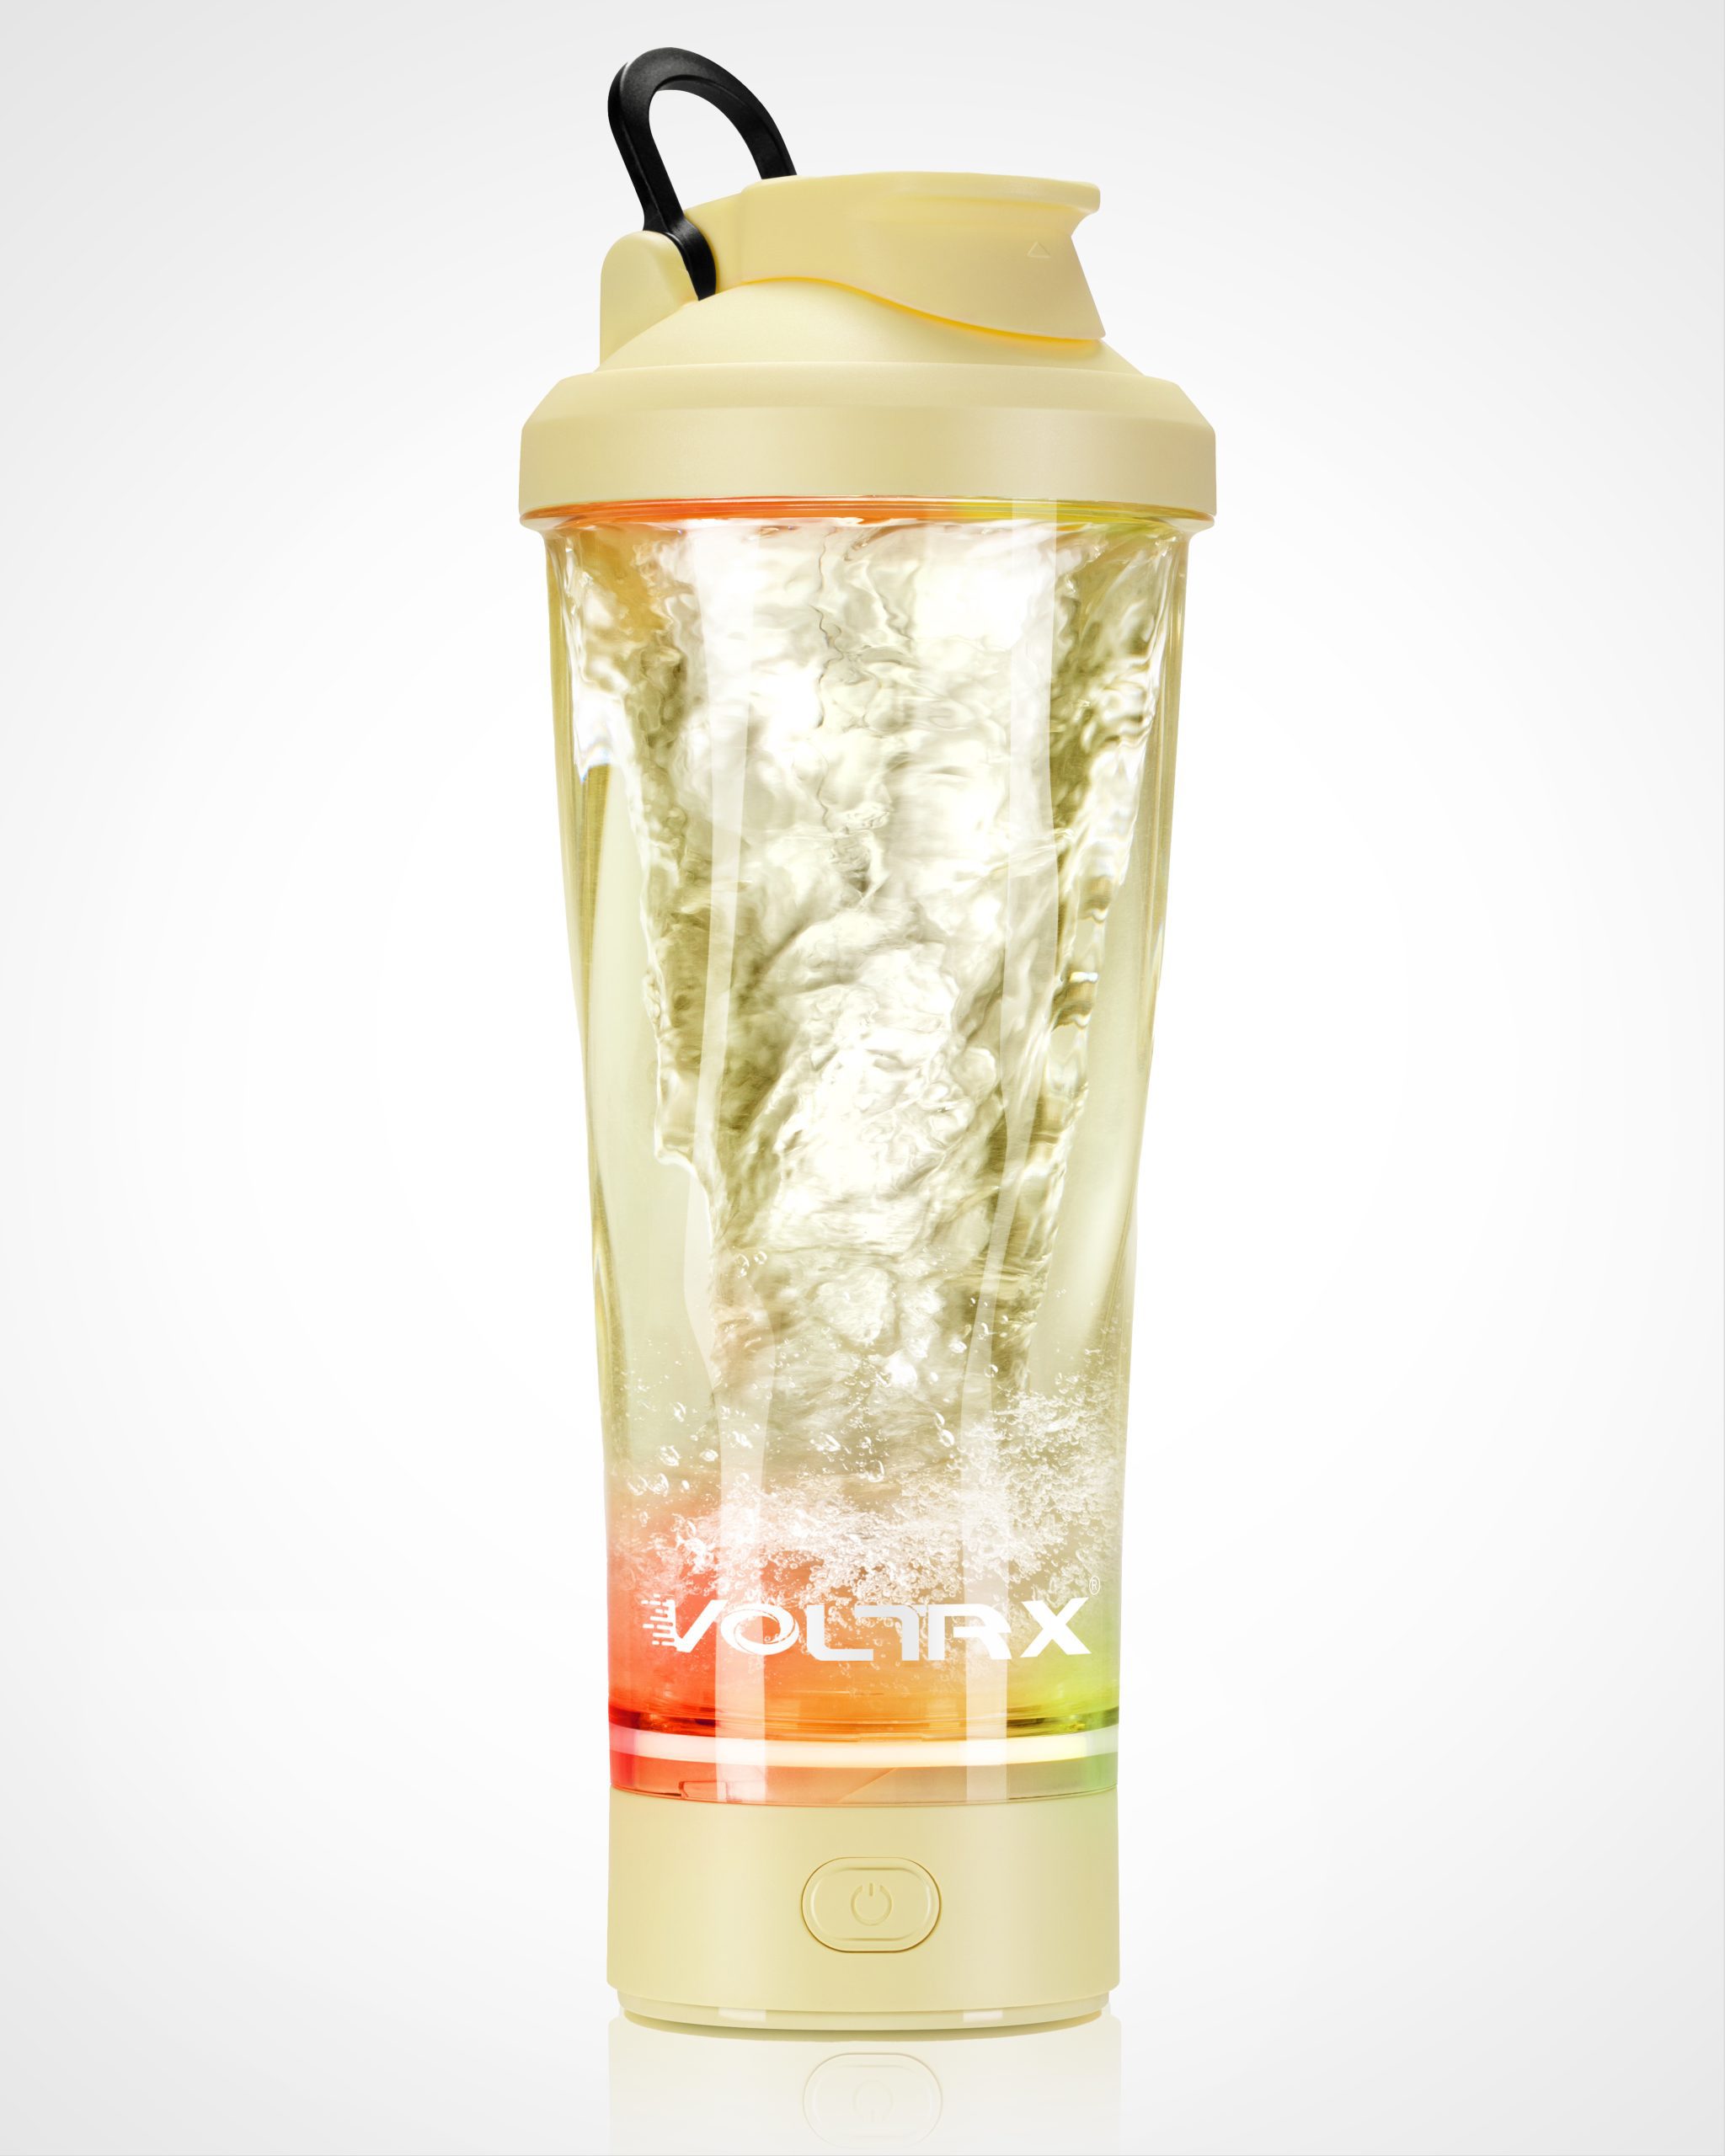 VOLTRX VortexBoost Limited Electric Shaker Bottle - Colored Base (Banana yellow)